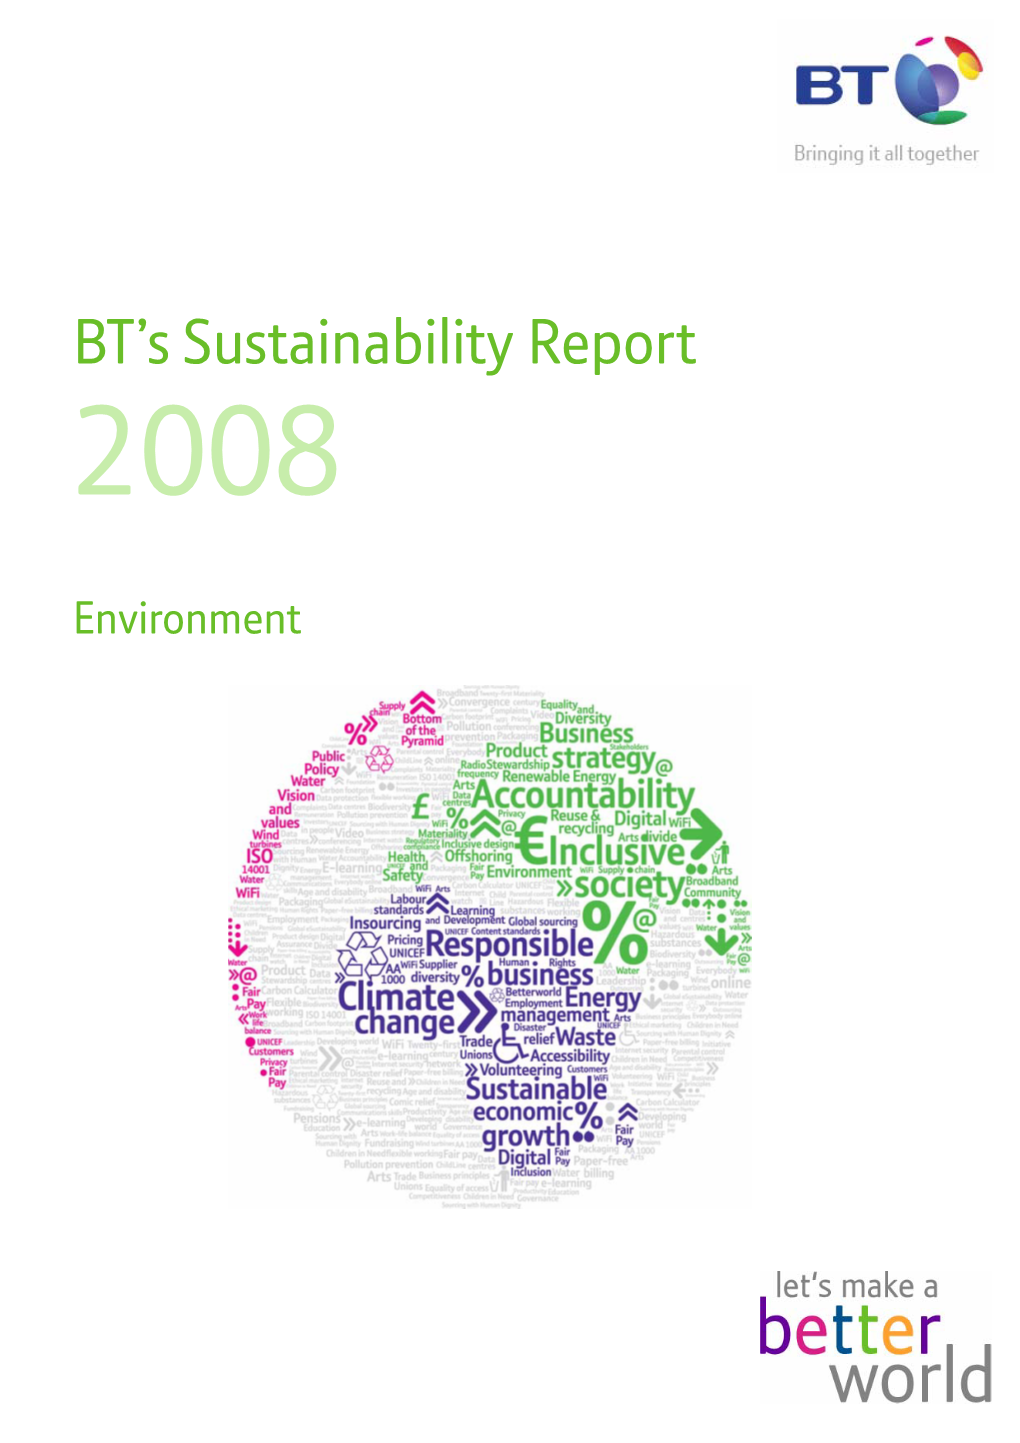 BT's Sustainability Report